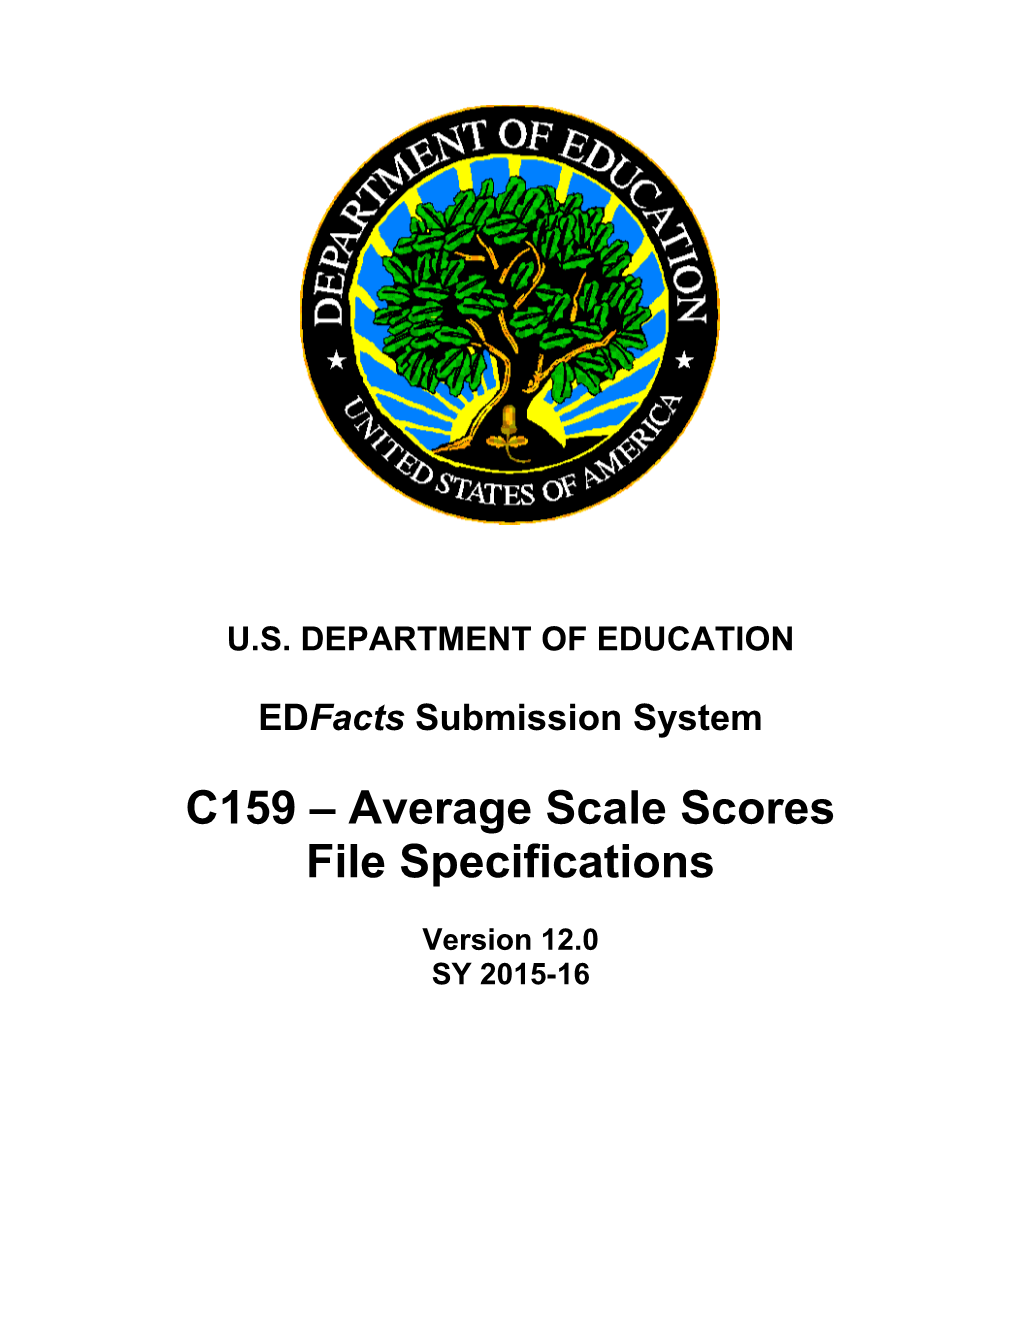 Average Scale Scores File Specifications (Msword)